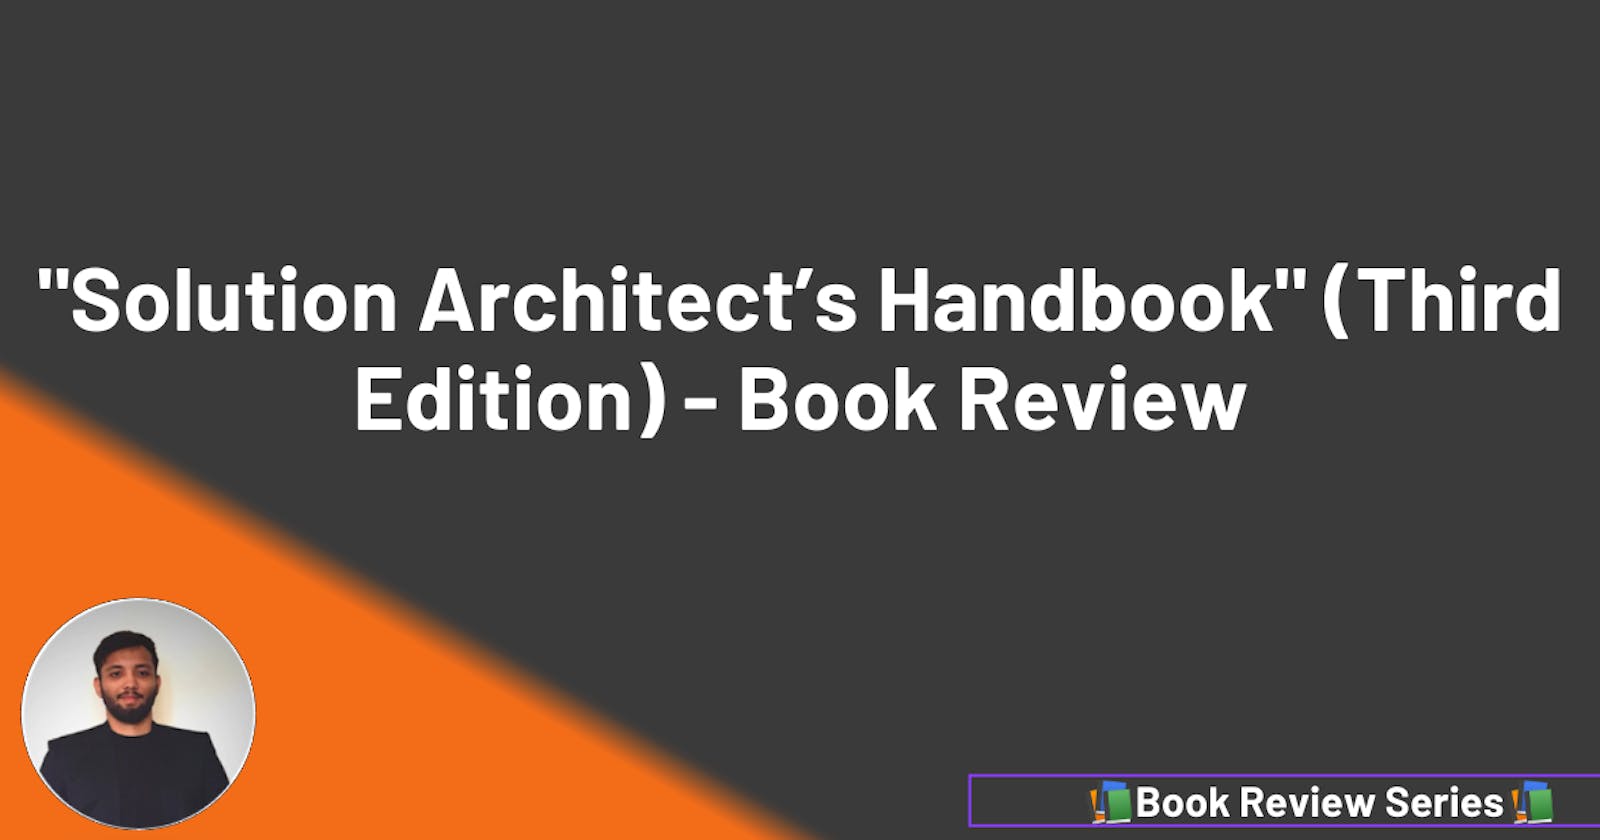 The 'Solution Architect's Handbook' - A Comprehensive Book Review for Modern Architecture Design